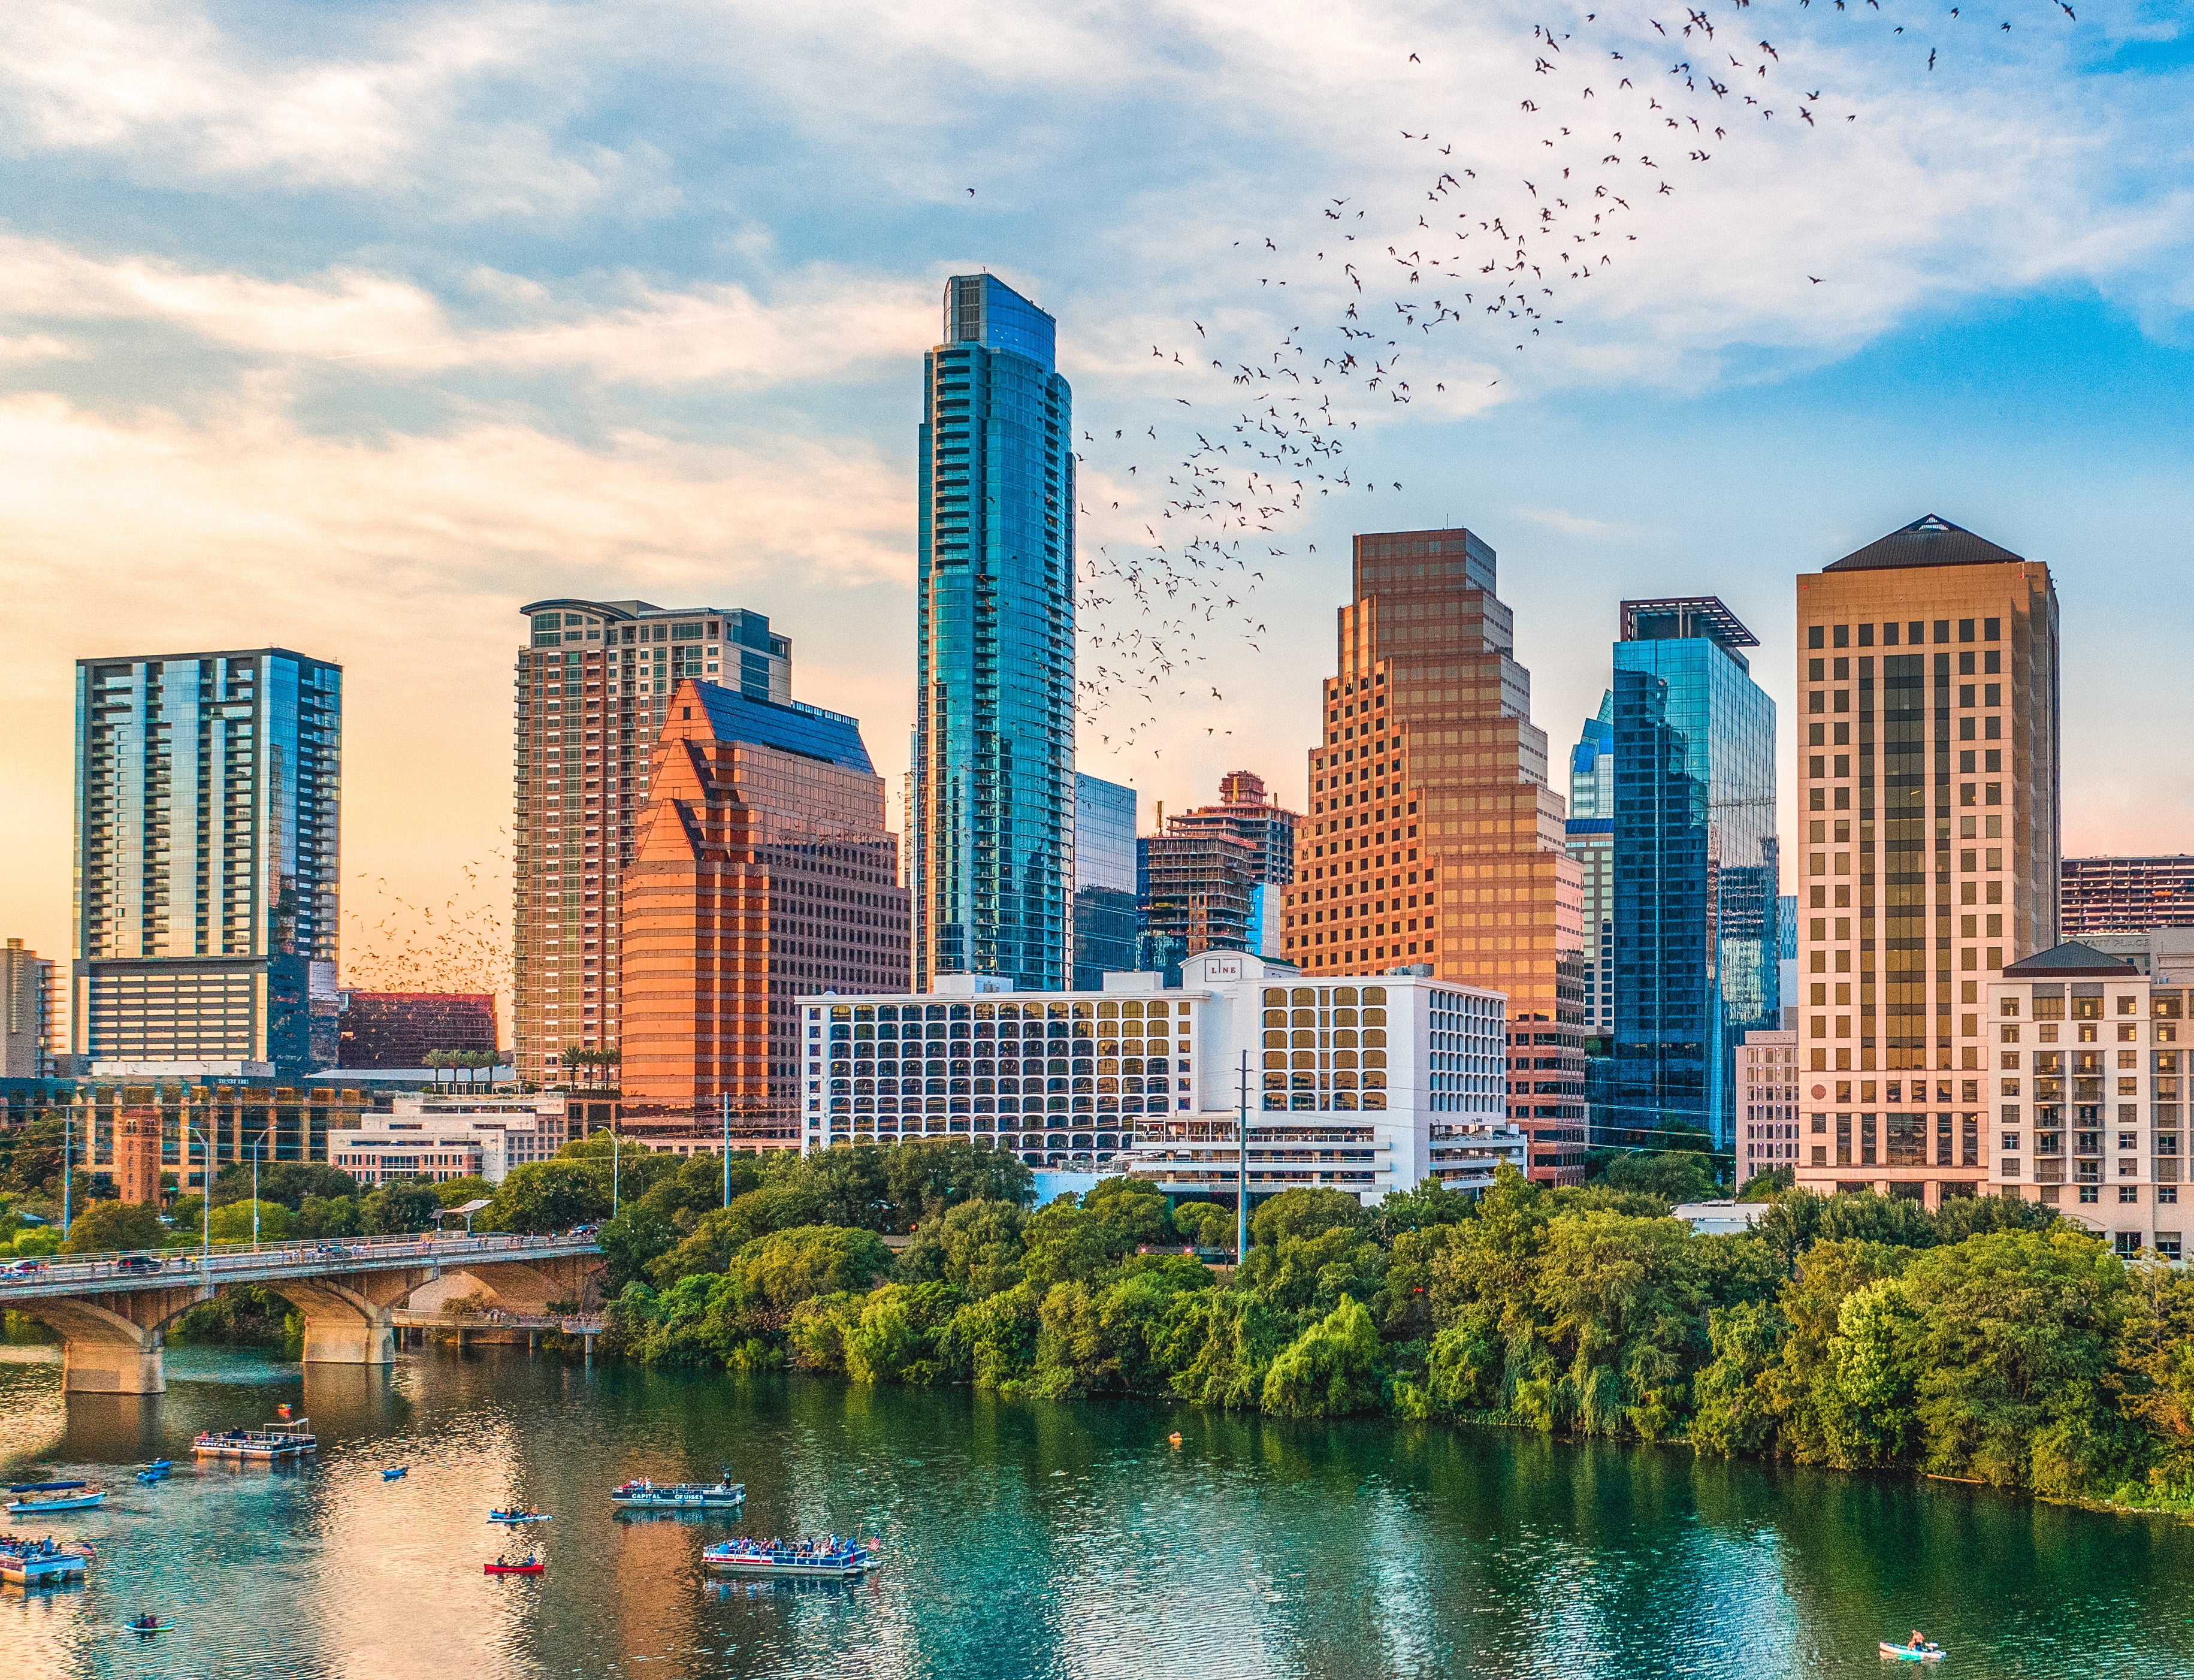 Austin’s blend of live music, great food, culture and quirk make this city a must-visit